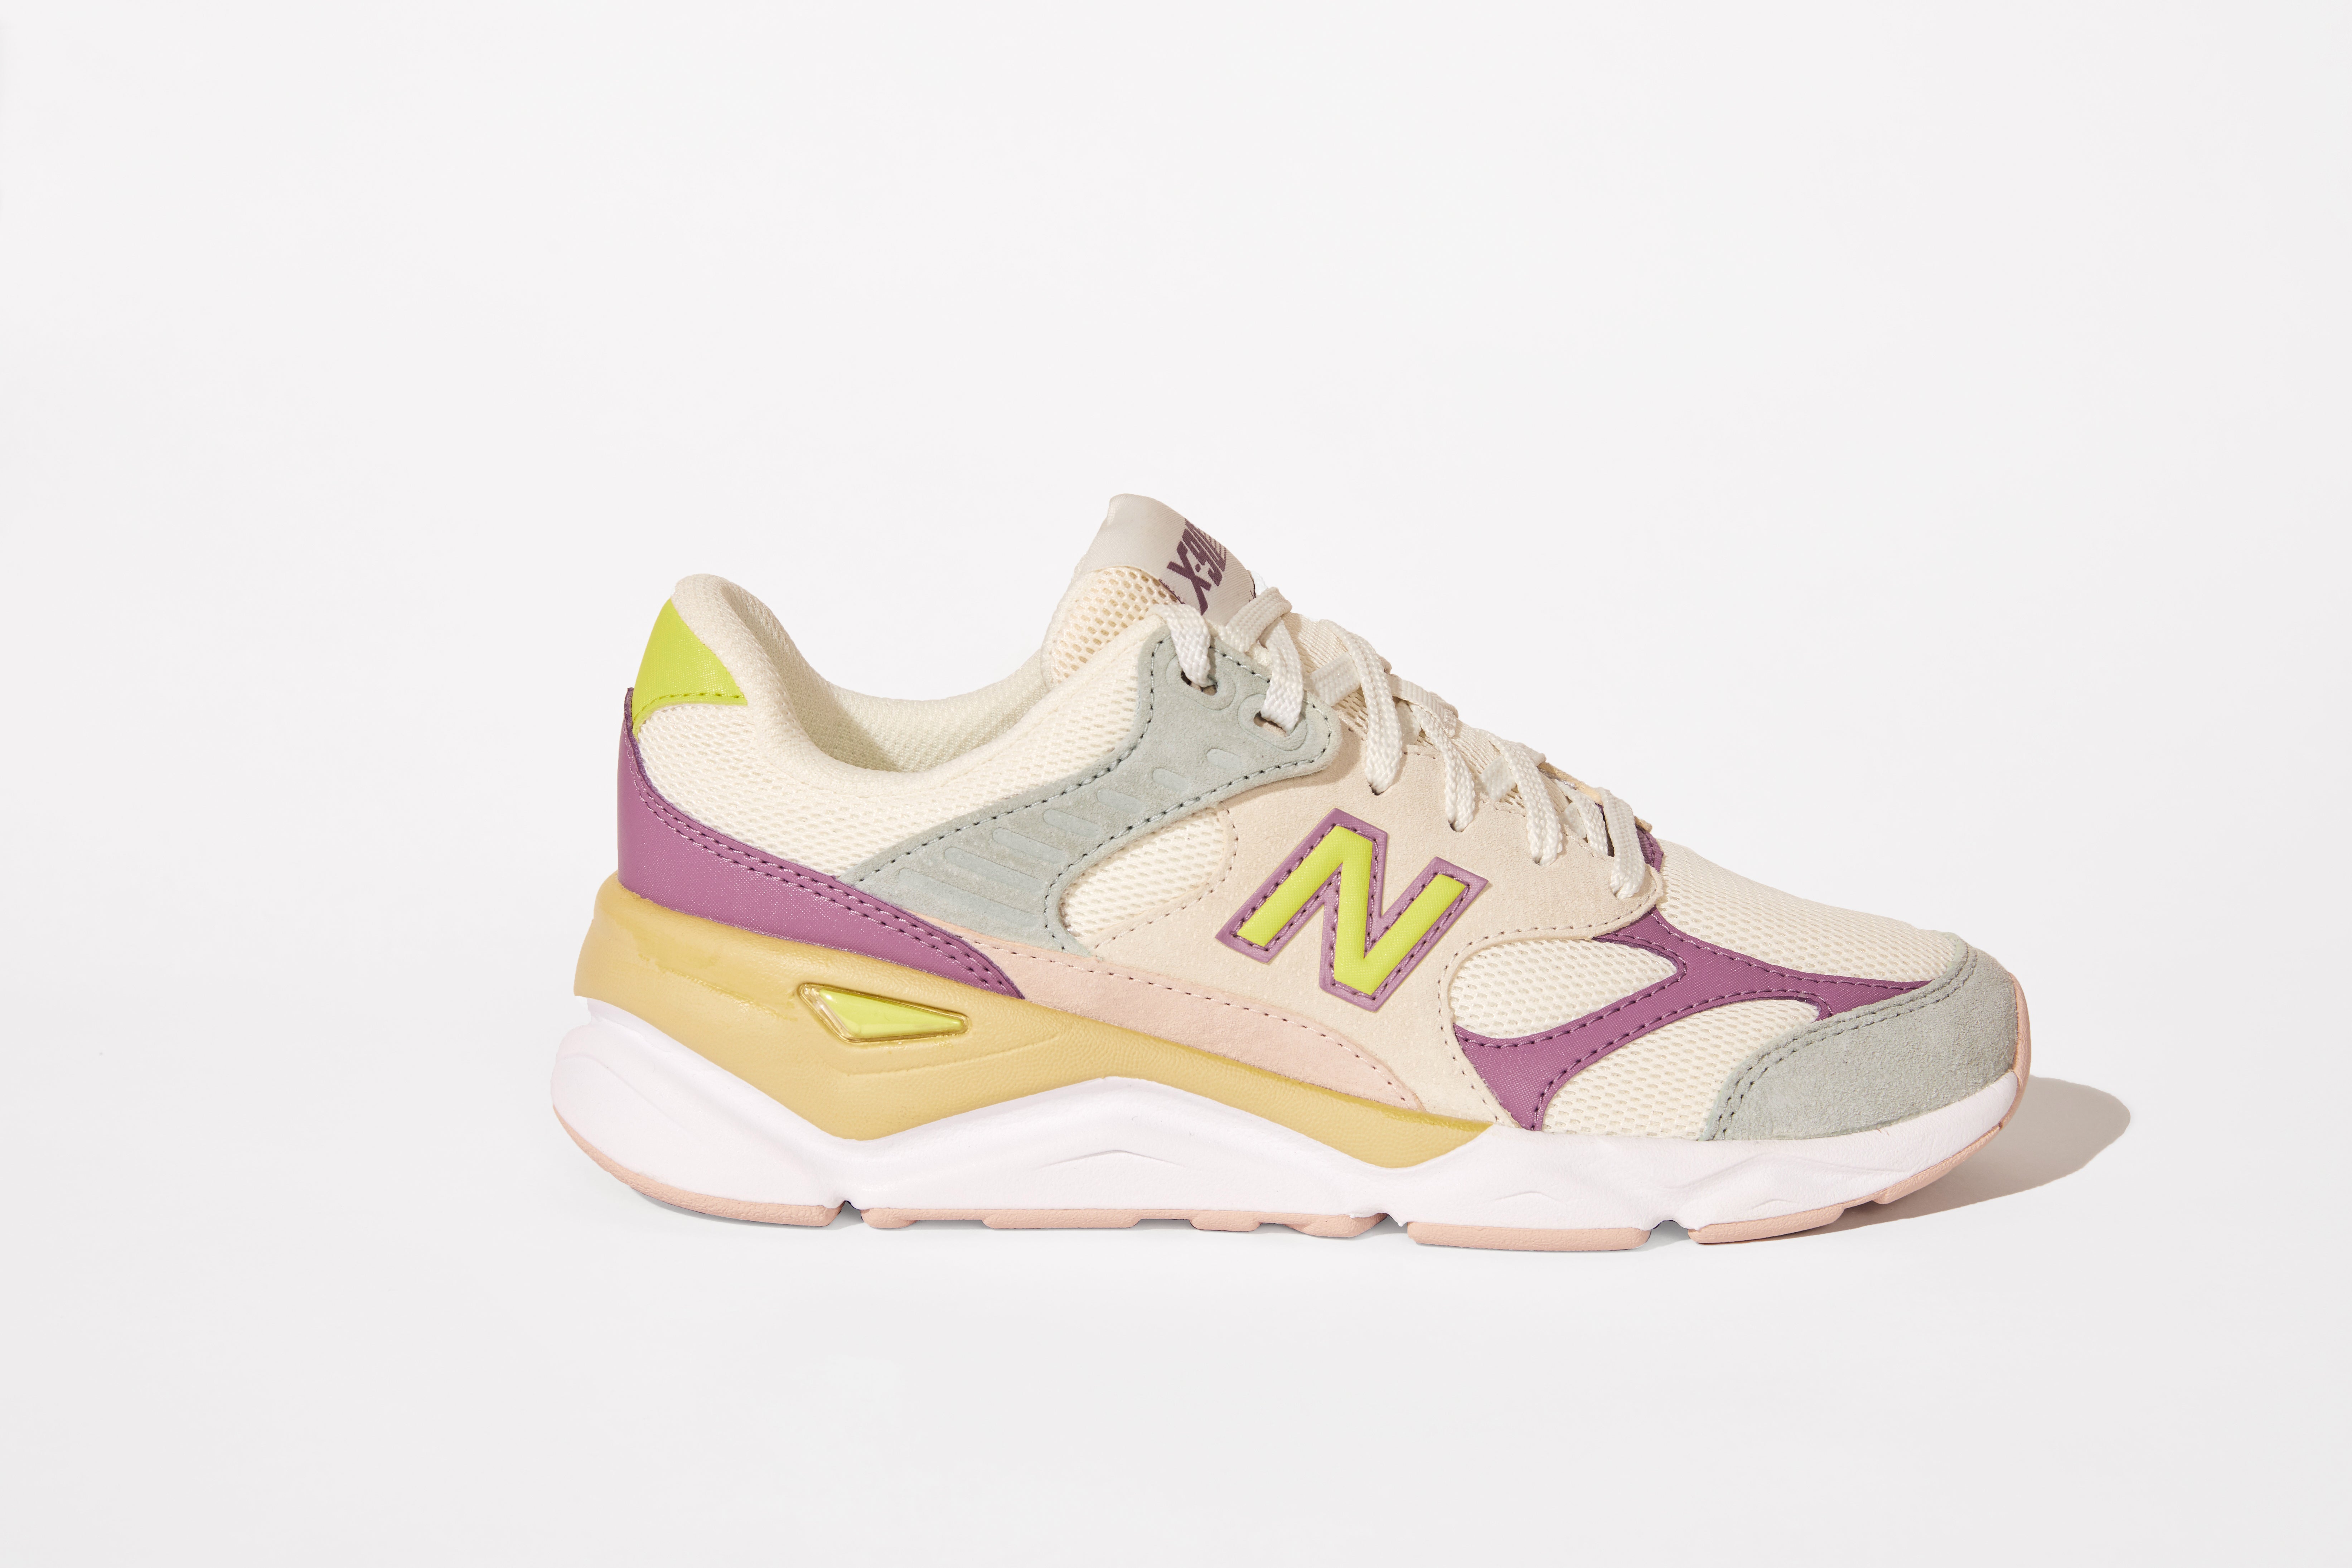 x9 new balance reconstructed